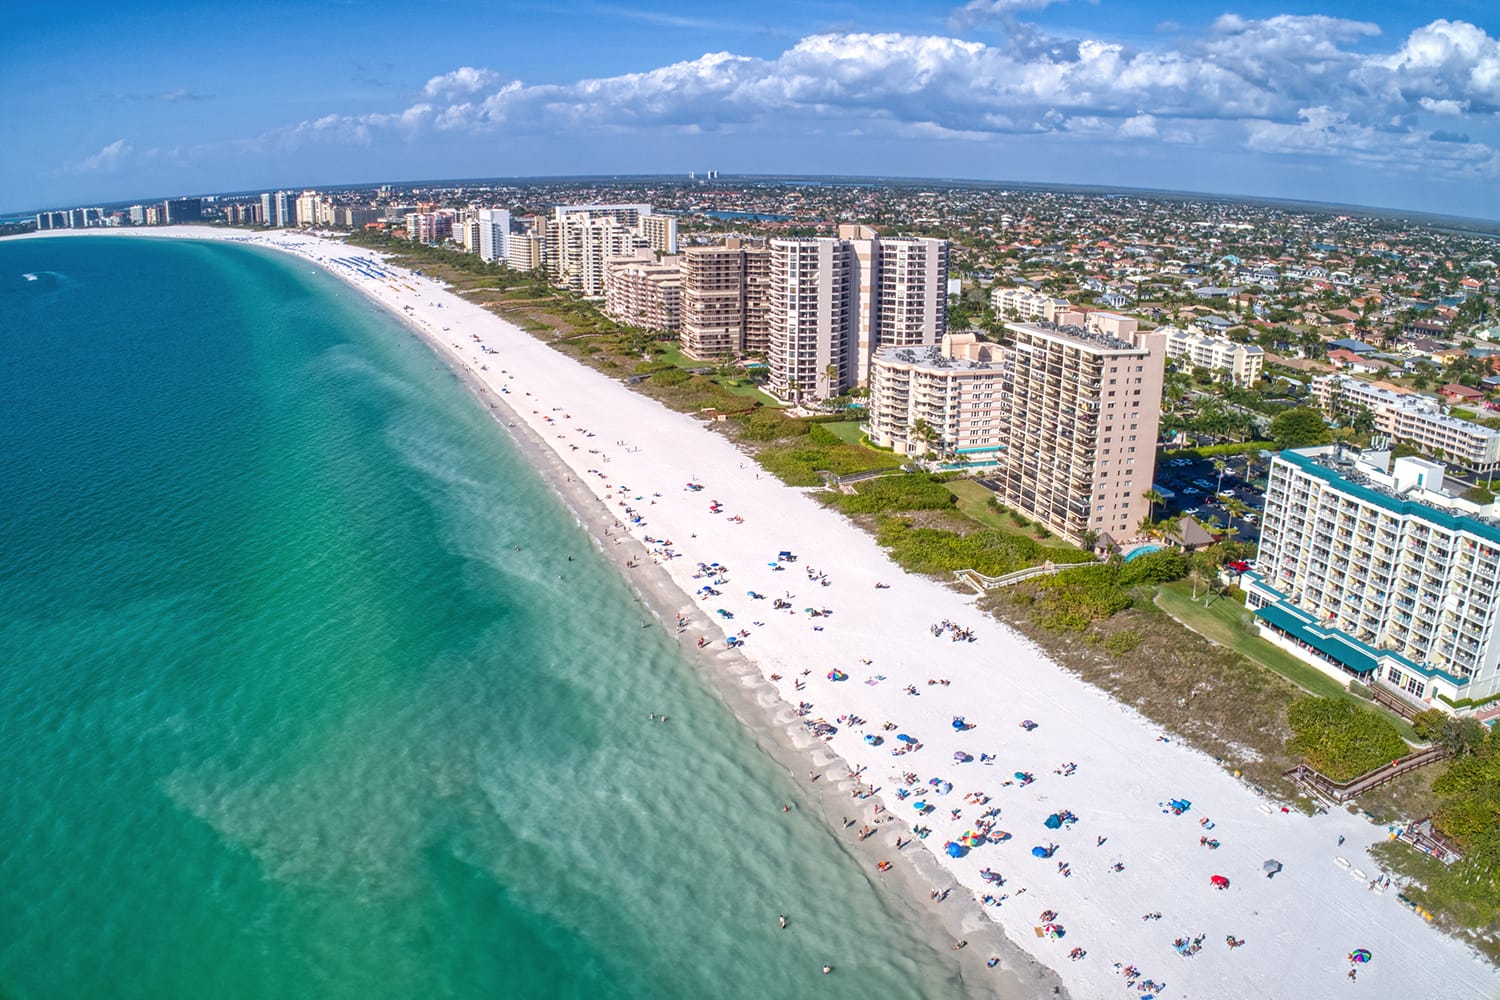 Aerial View of Marco Island, A popular Tourist Town in Florida